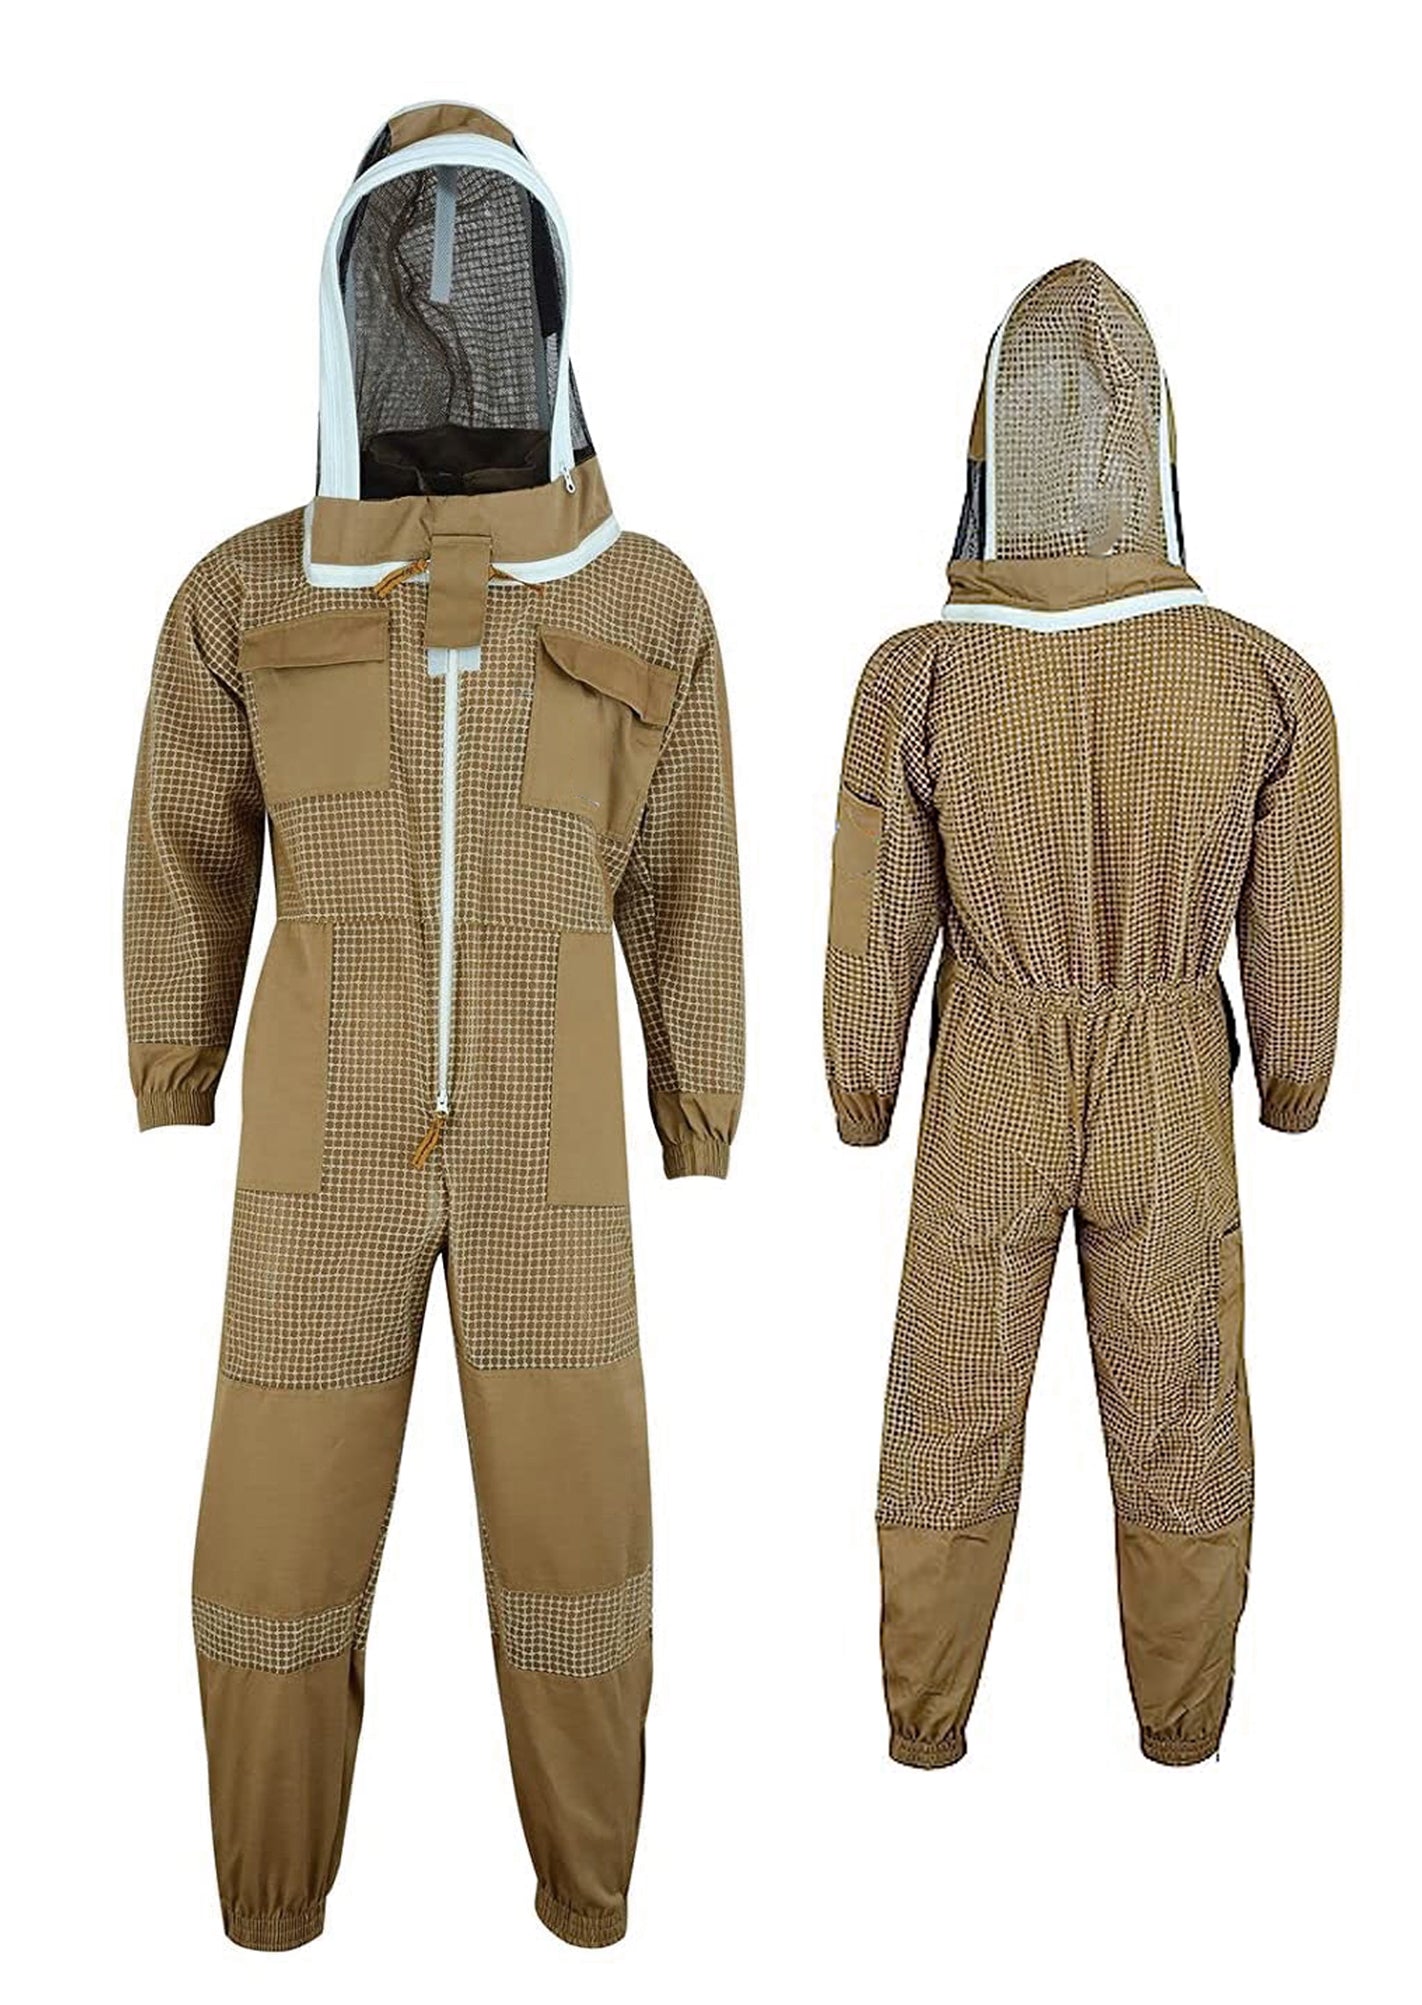 Beehive Suits: Unbeeable😏 with sting free protection [Do not Buy]